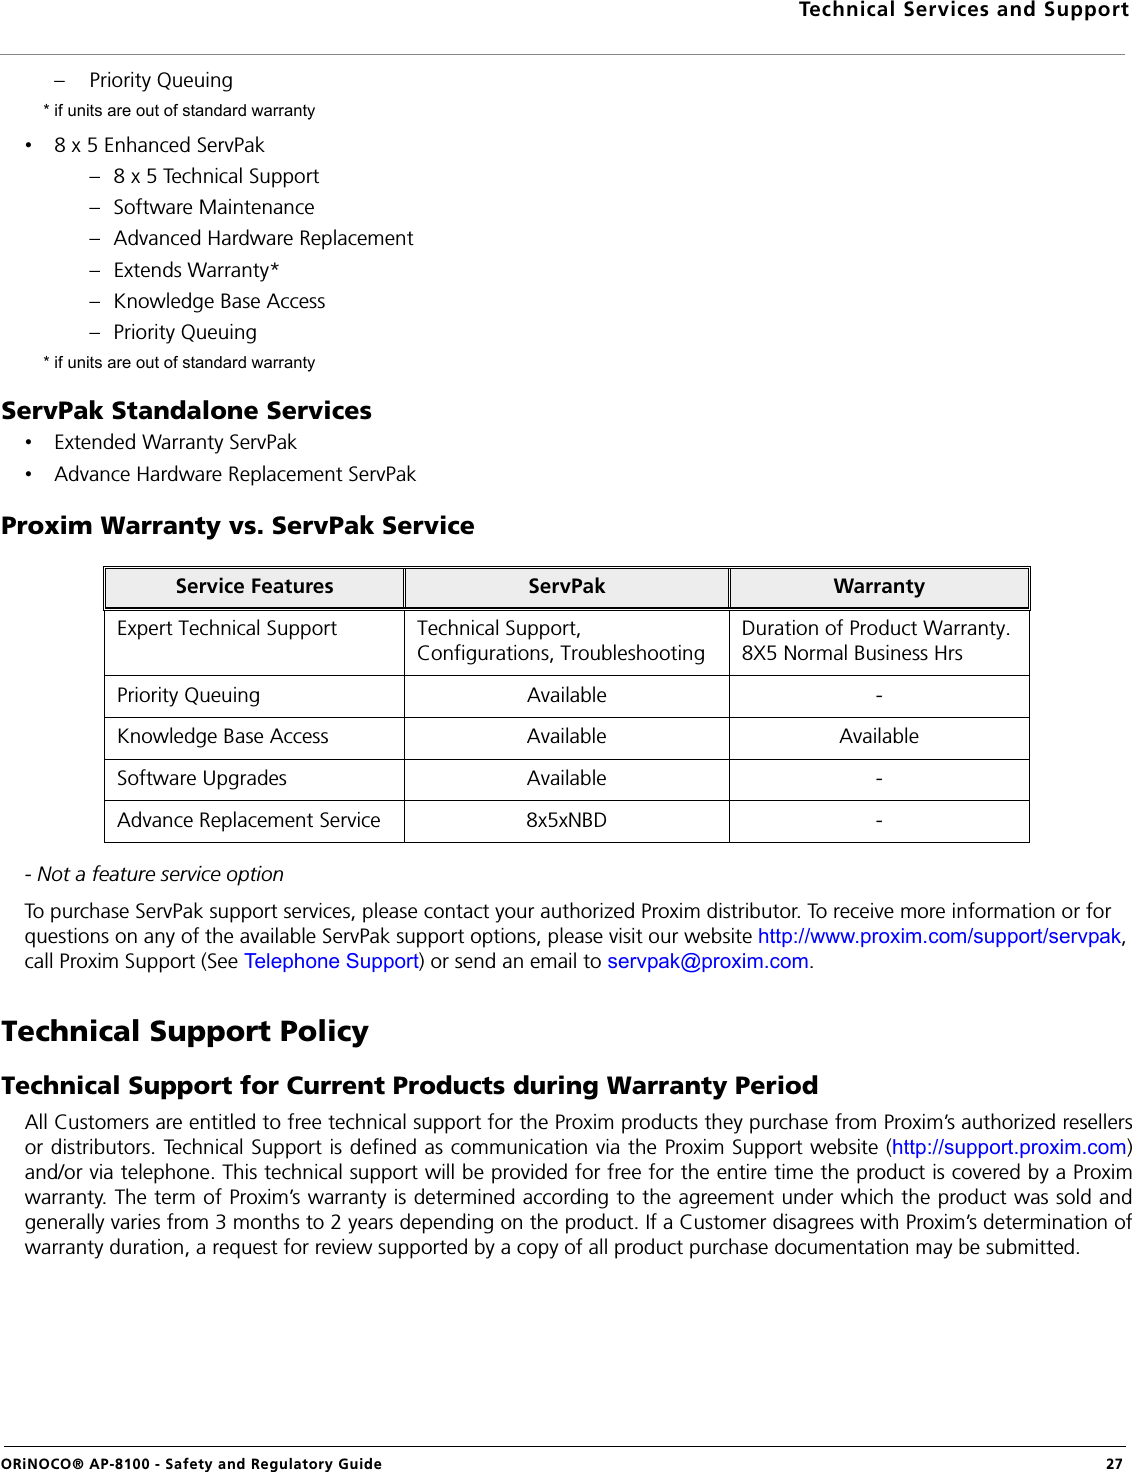 Technical Services and SupportORiNOCO® AP-8100 - Safety and Regulatory Guide  27– Priority Queuing * if units are out of standard warranty•8 x 5 Enhanced ServPak– 8 x 5 Technical Support– Software Maintenance– Advanced Hardware Replacement– Extends Warranty*– Knowledge Base Access– Priority Queuing * if units are out of standard warrantyServPak Standalone Services•Extended Warranty ServPak•Advance Hardware Replacement ServPakProxim Warranty vs. ServPak Service- Not a feature service optionTo purchase ServPak support services, please contact your authorized Proxim distributor. To receive more information or for questions on any of the available ServPak support options, please visit our website http://www.proxim.com/support/servpak, call Proxim Support (See Telephone Support) or send an email to servpak@proxim.com.Technical Support PolicyTechnical Support for Current Products during Warranty PeriodAll Customers are entitled to free technical support for the Proxim products they purchase from Proxim’s authorized resellersor distributors. Technical Support is defined as communication via the Proxim Support website (http://support.proxim.com)and/or via telephone. This technical support will be provided for free for the entire time the product is covered by a Proximwarranty. The term of Proxim’s warranty is determined according to the agreement under which the product was sold andgenerally varies from 3 months to 2 years depending on the product. If a Customer disagrees with Proxim’s determination ofwarranty duration, a request for review supported by a copy of all product purchase documentation may be submitted.Service Features ServPak WarrantyExpert Technical Support Technical Support, Configurations, TroubleshootingDuration of Product Warranty. 8X5 Normal Business HrsPriority Queuing Available -Knowledge Base Access Available AvailableSoftware Upgrades Available -Advance Replacement Service 8x5xNBD -